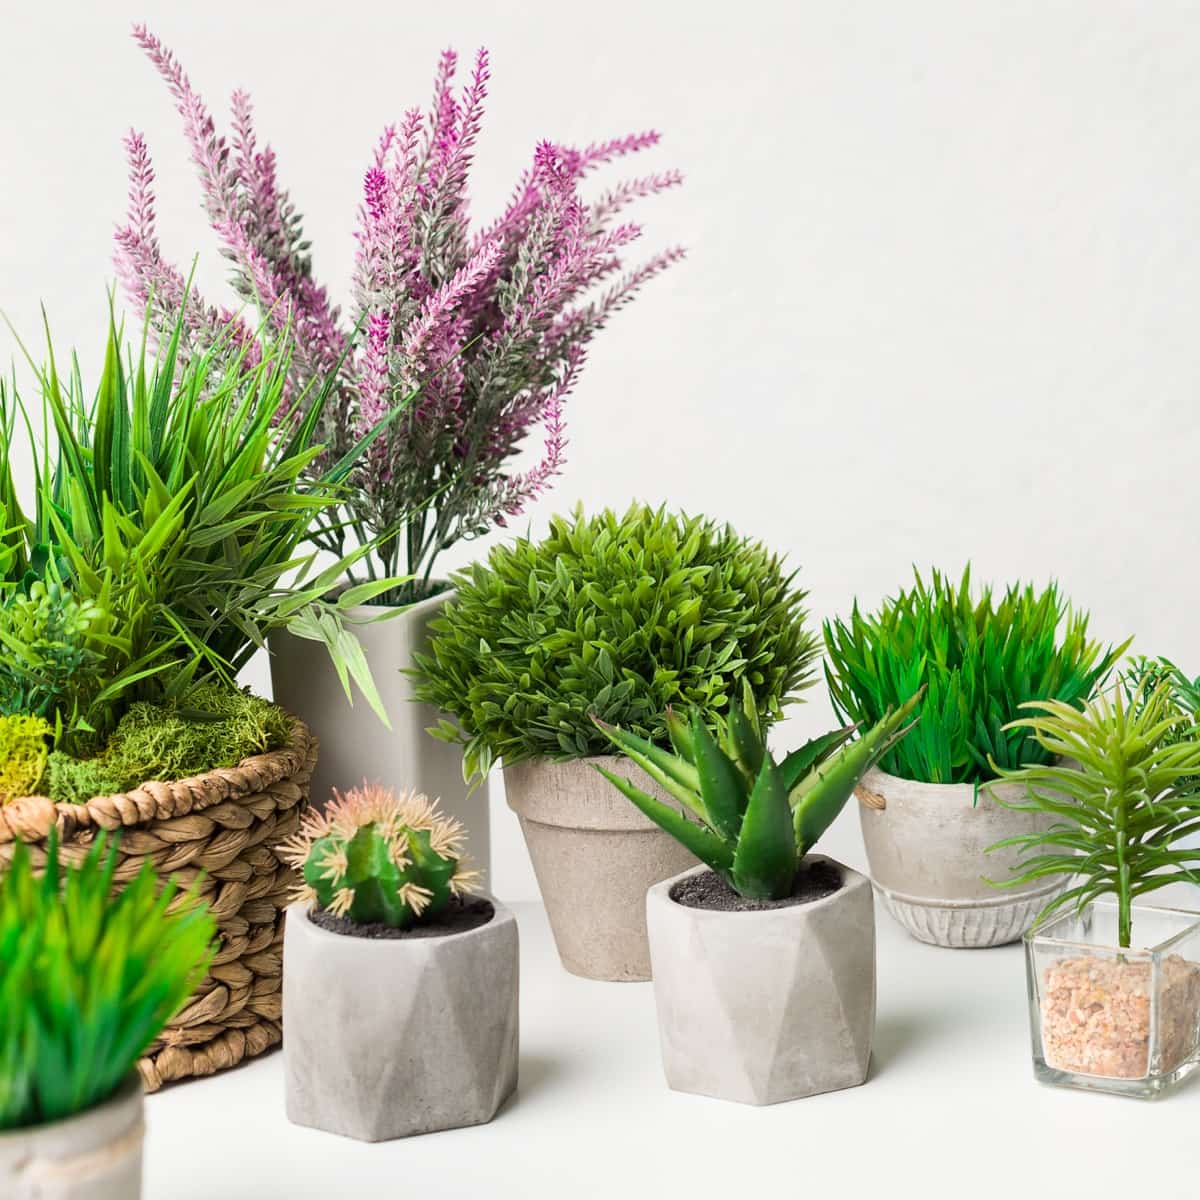 Profitable Synthetic-Based Business Ideas: Artificial Plant Nursery